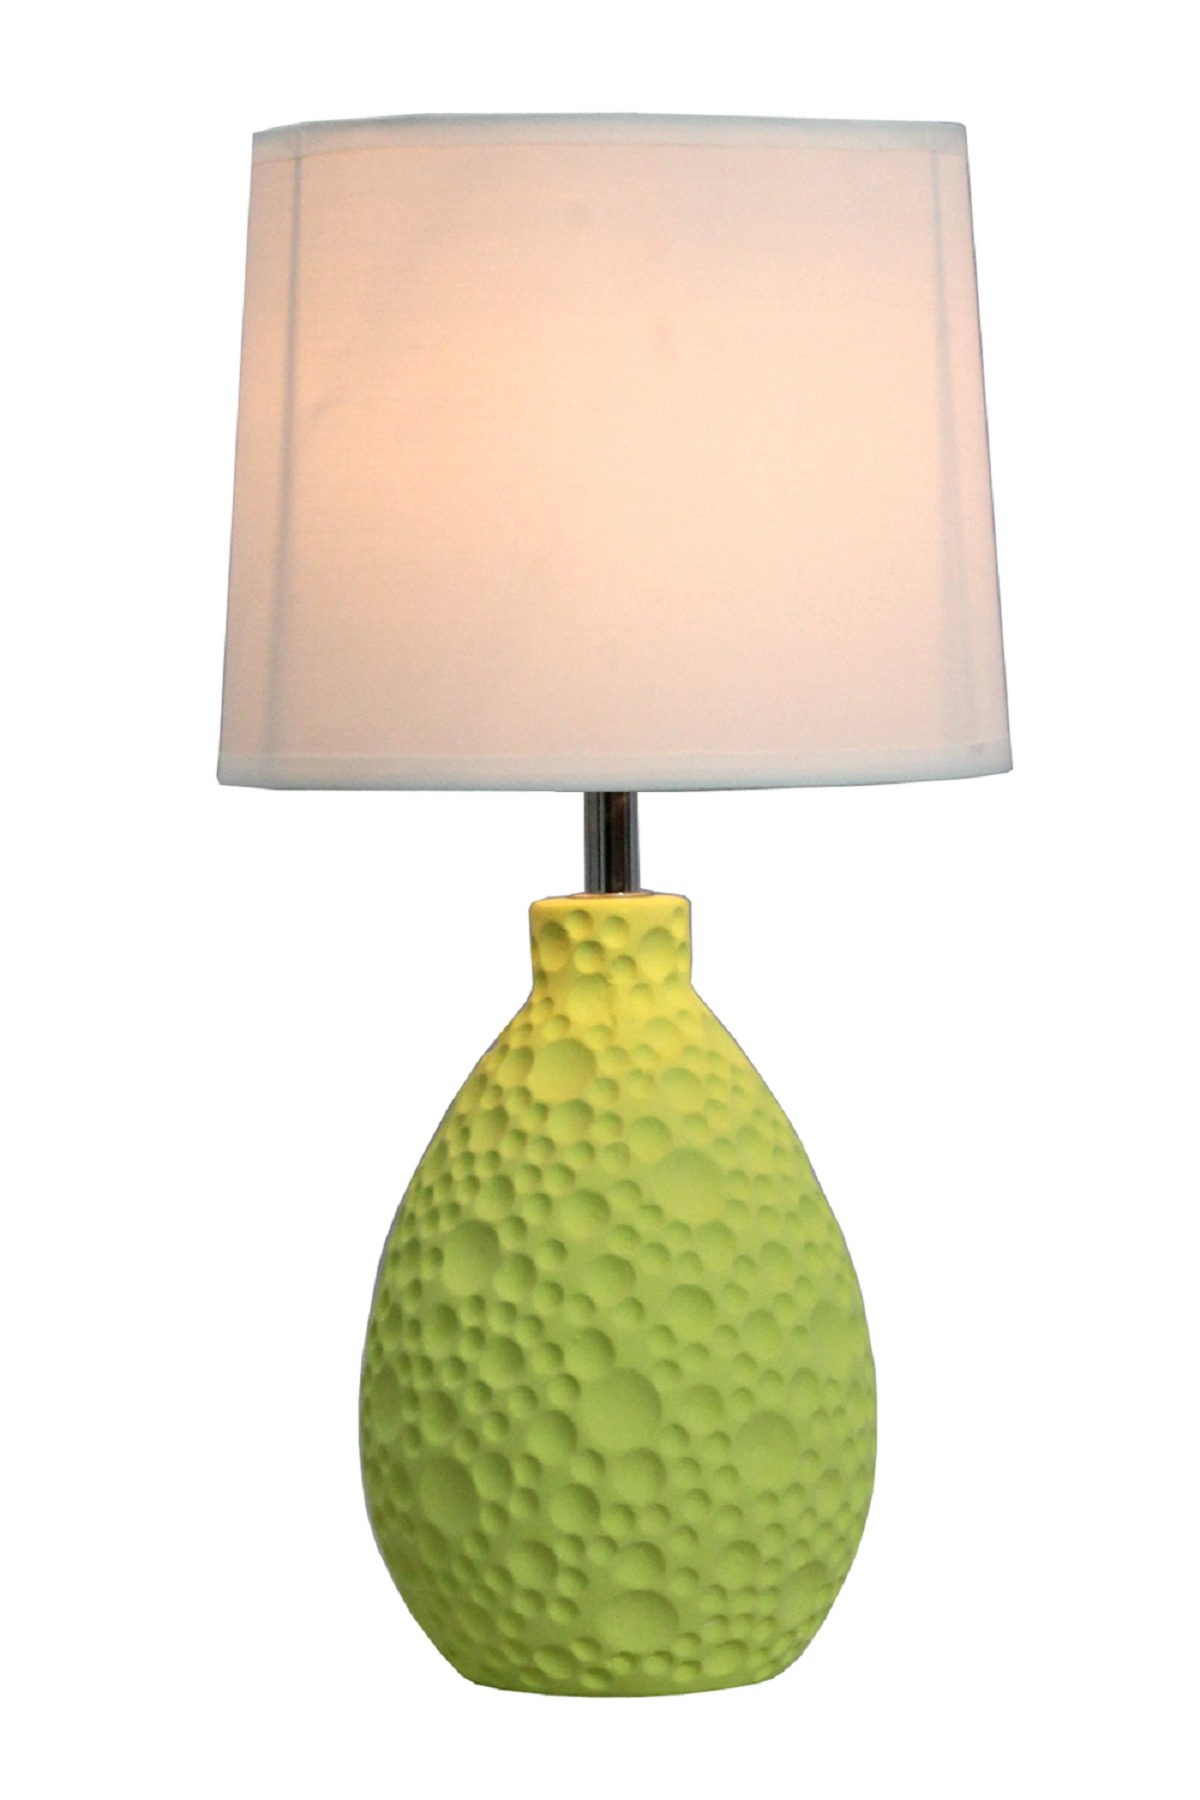 Simple Designs Green Texturized Ceramic Oval Table Lamp